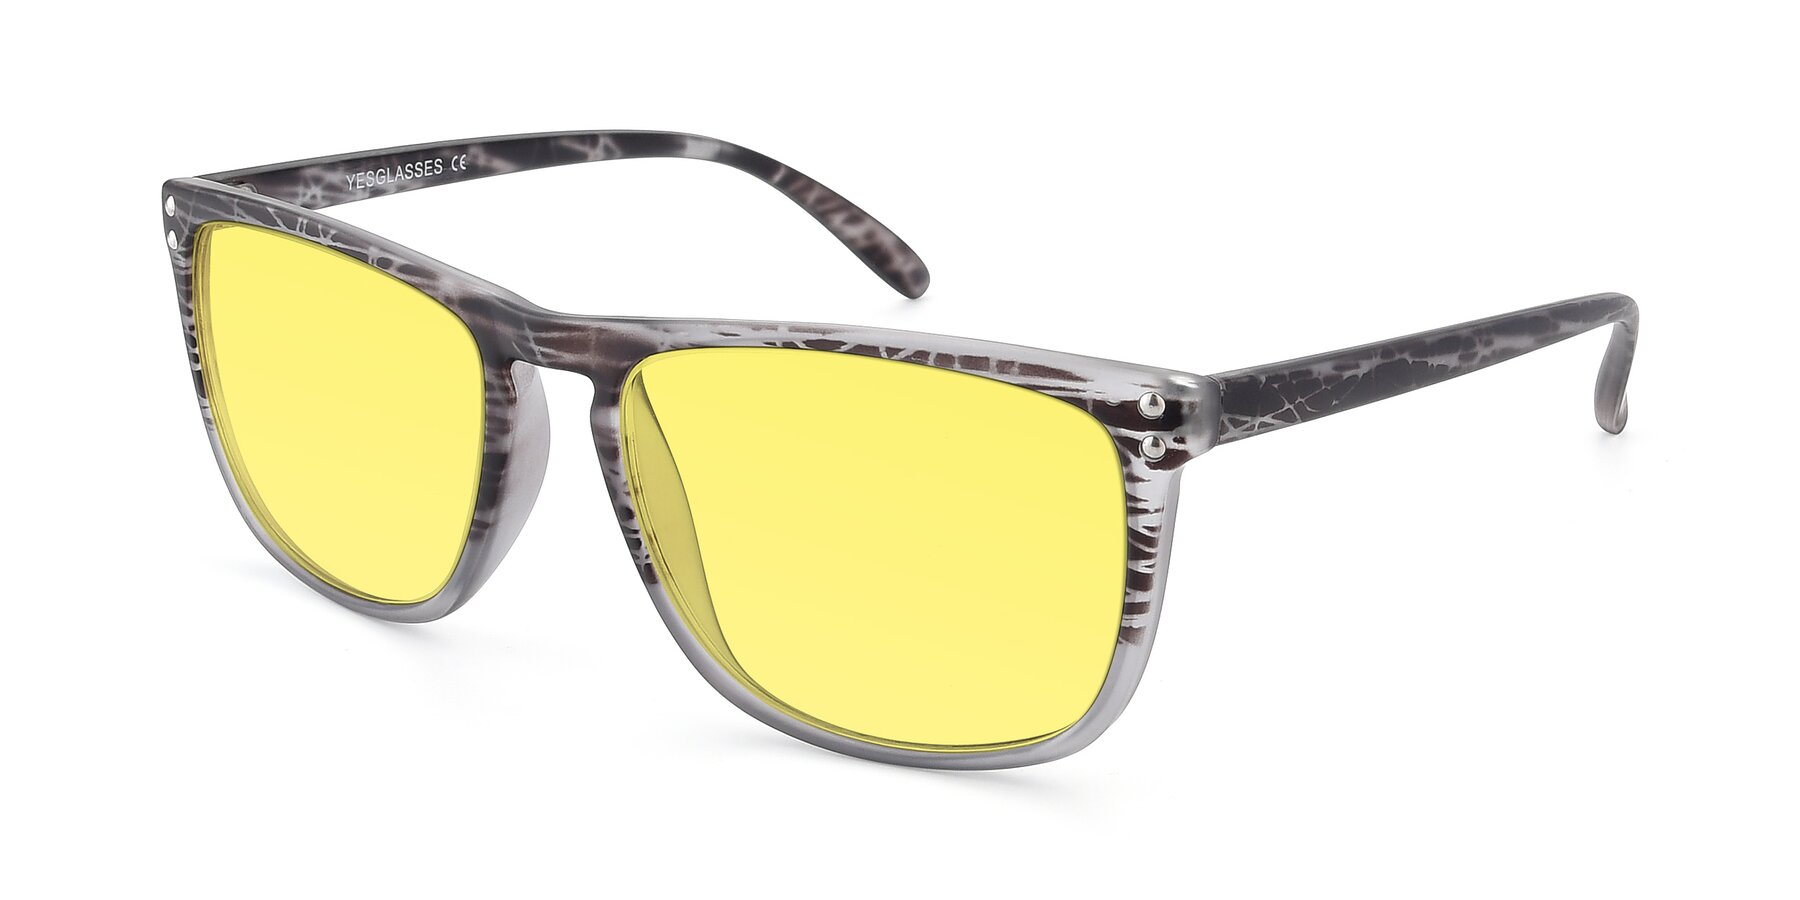 Angle of SSR411 in Translucent Floral Grey with Medium Yellow Tinted Lenses